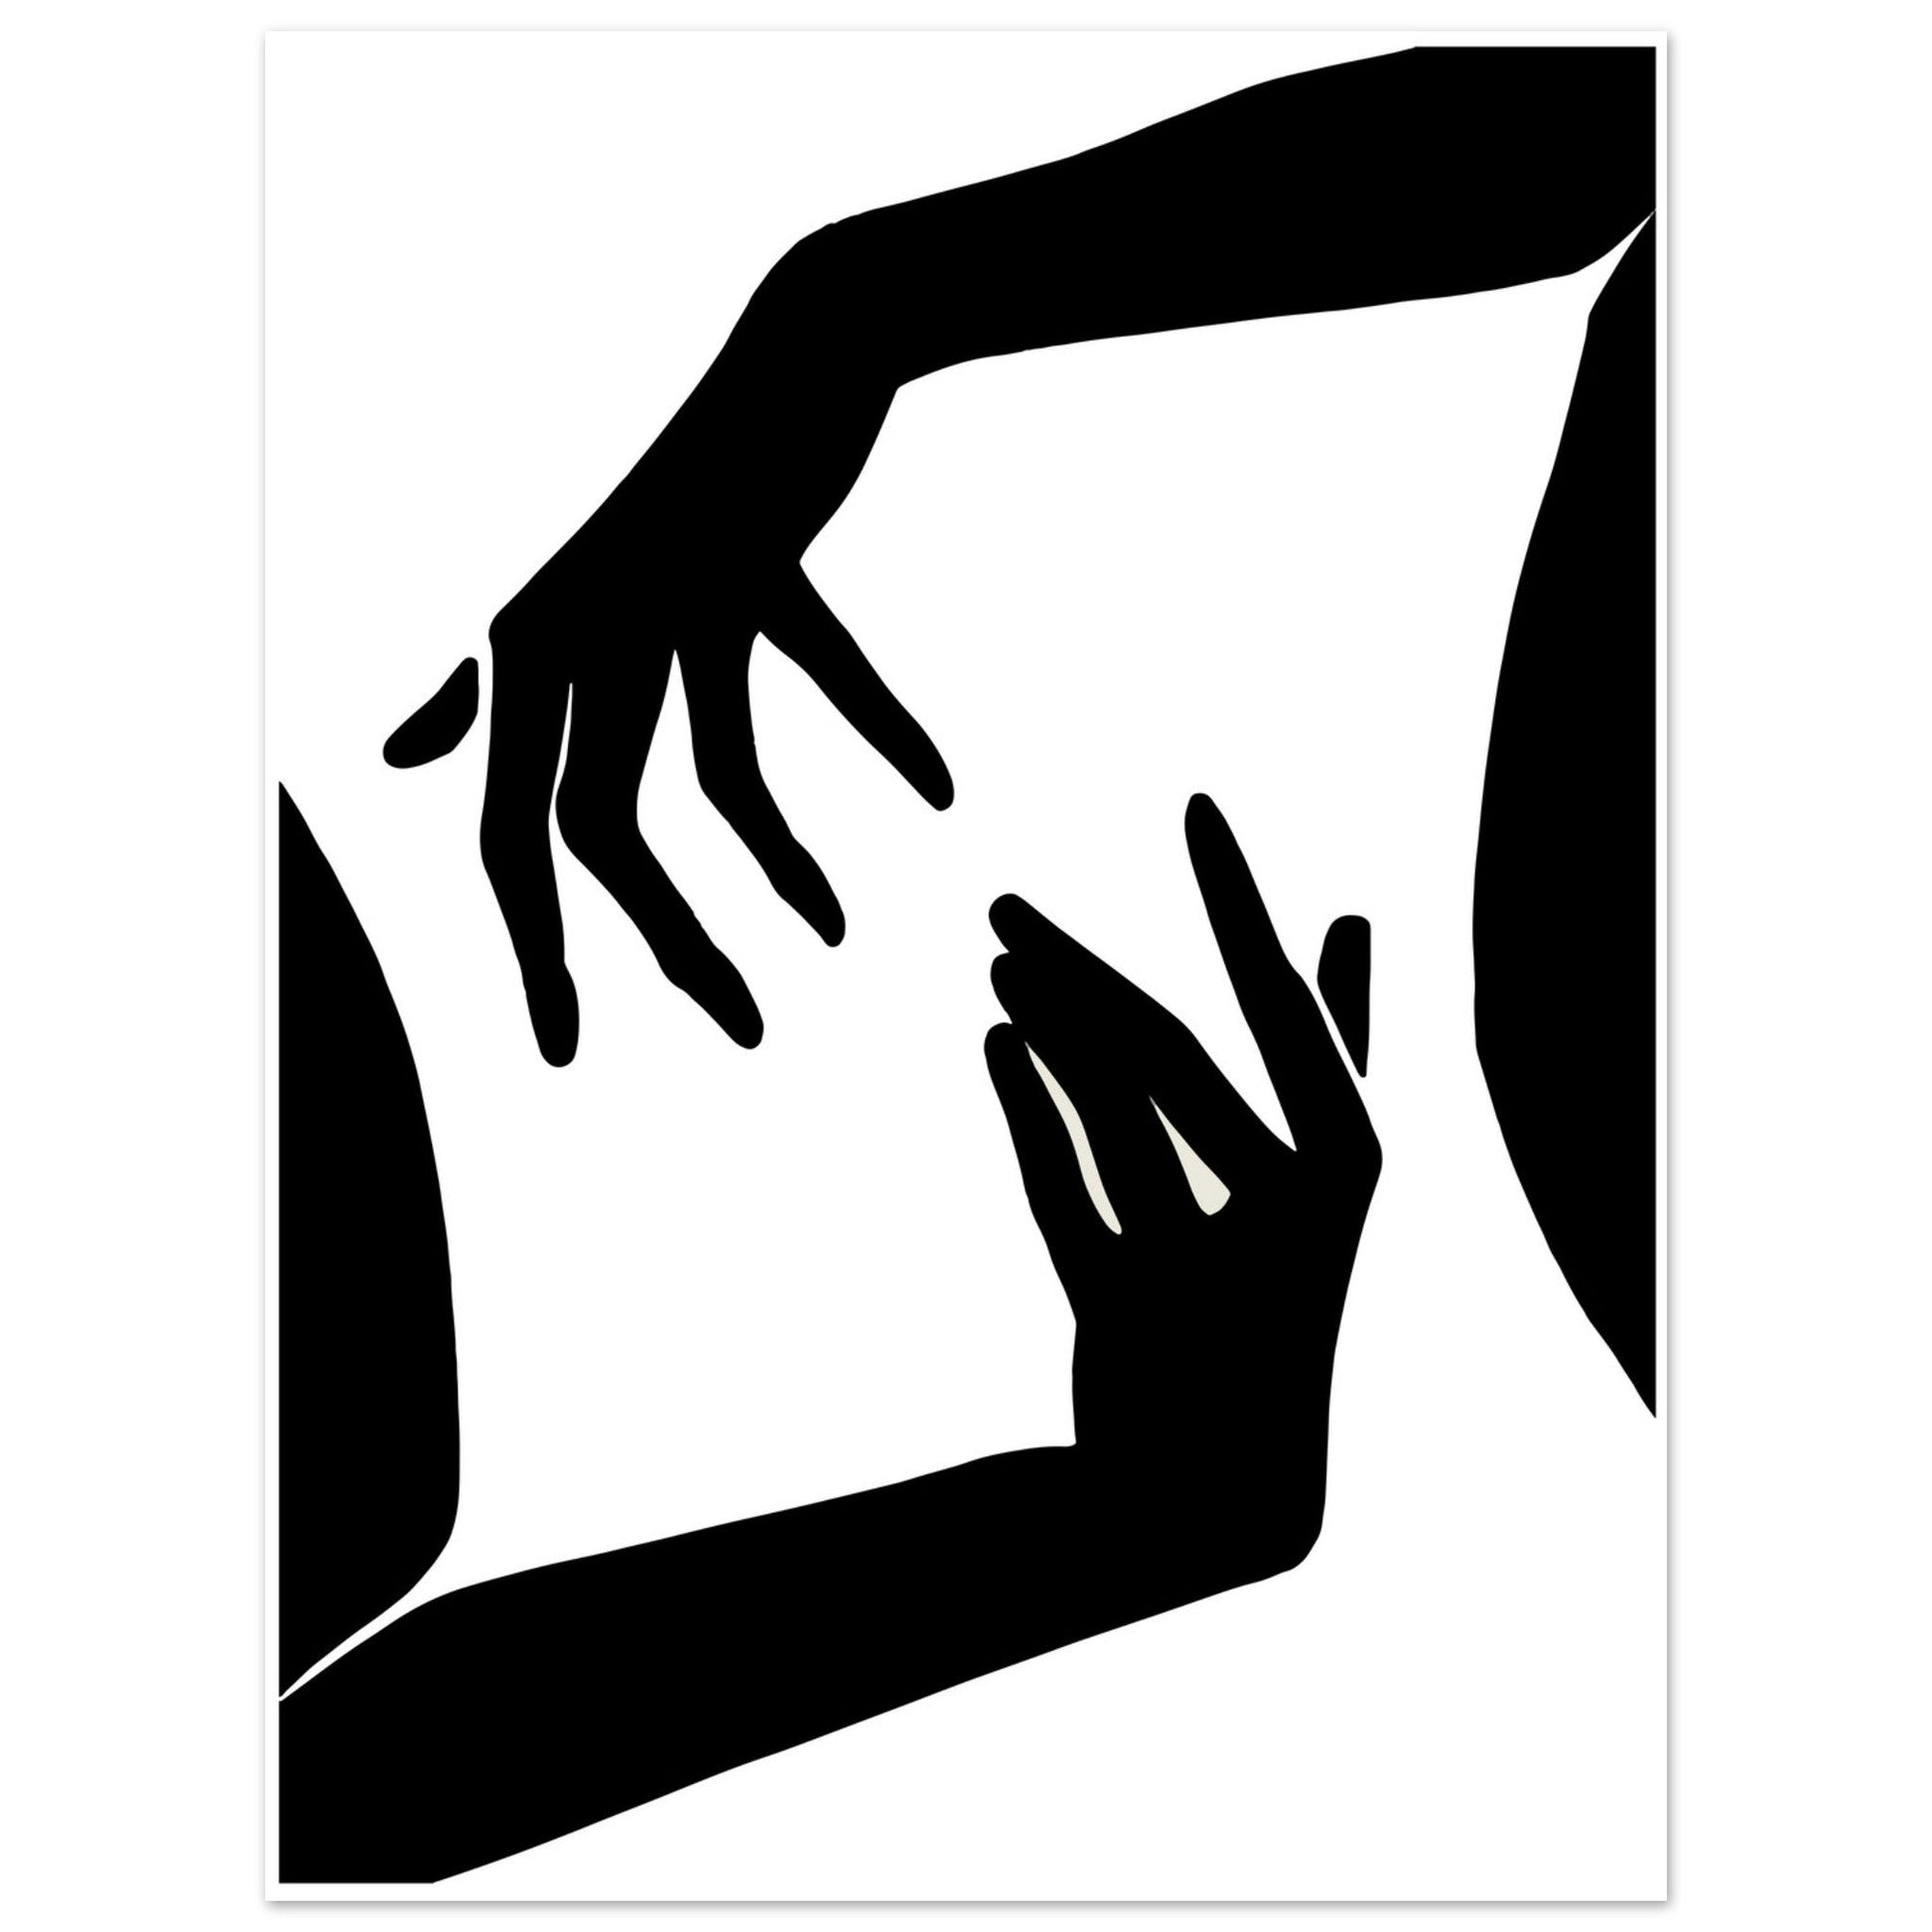 Hold My hand - All Lives Matter, Abstract Poster, Black and white, Black Lives Matter, #illieeart